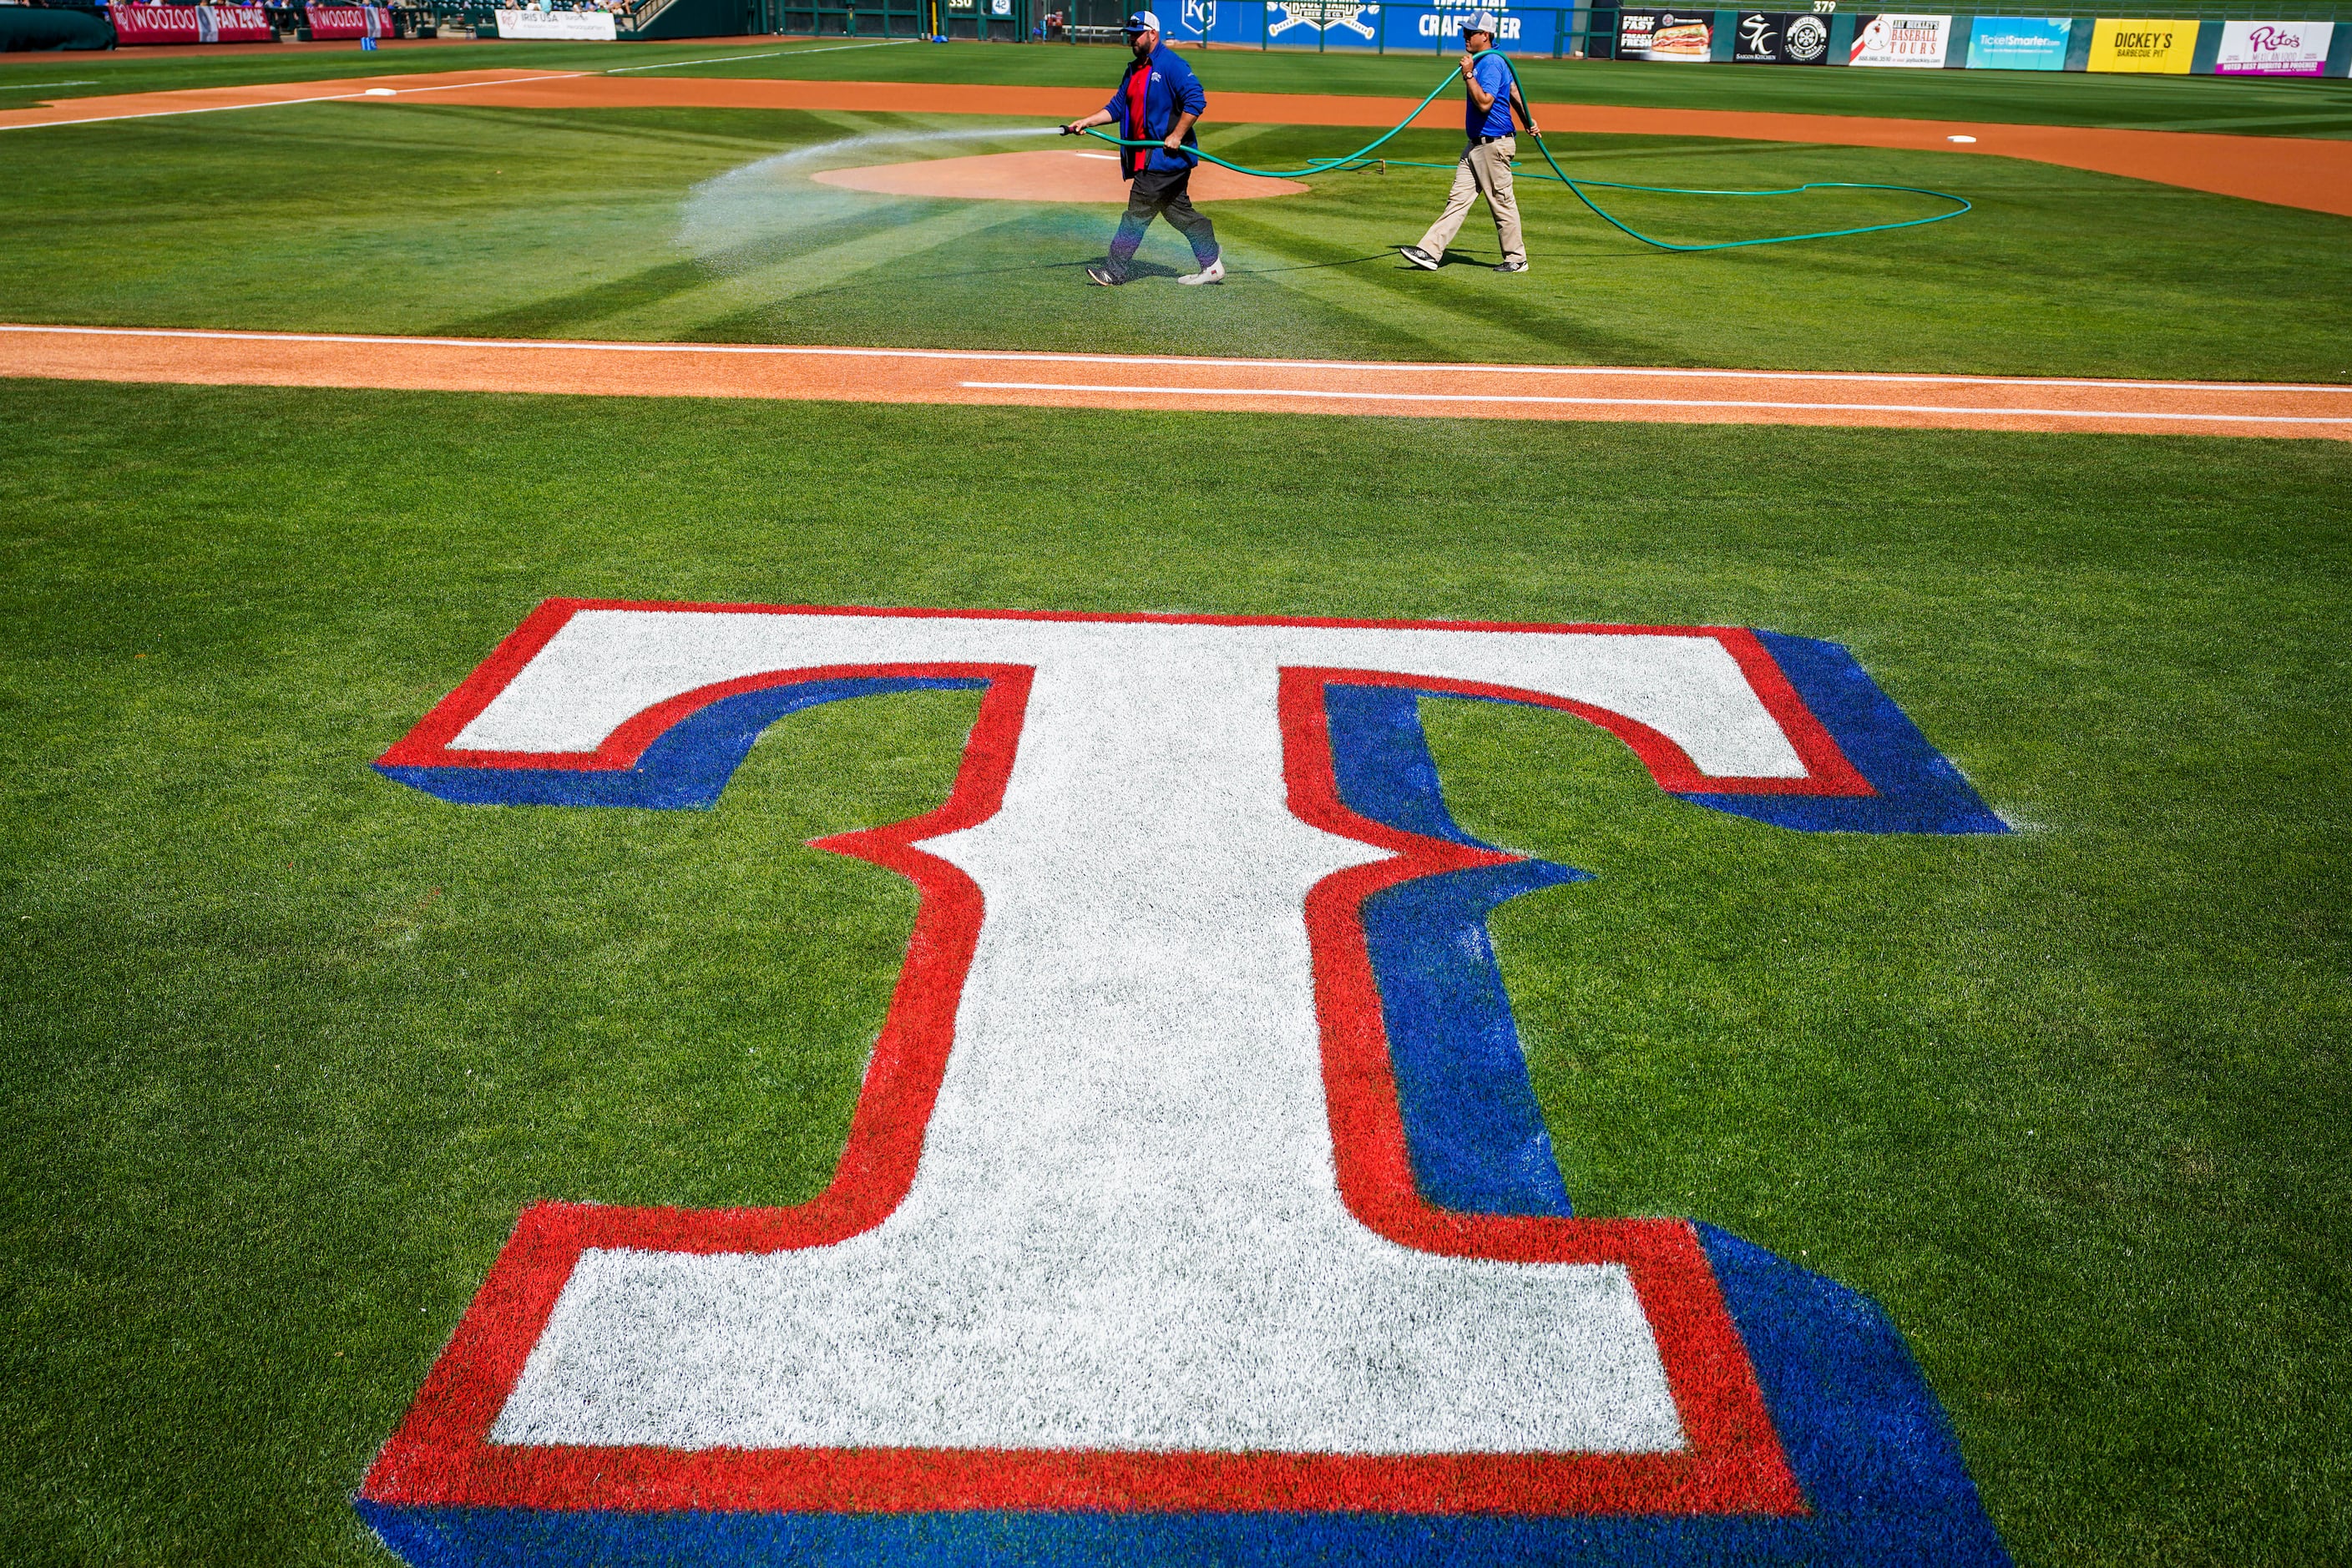 Groundskeepers prepare the field before a spring game between the Texas Rangers and the...